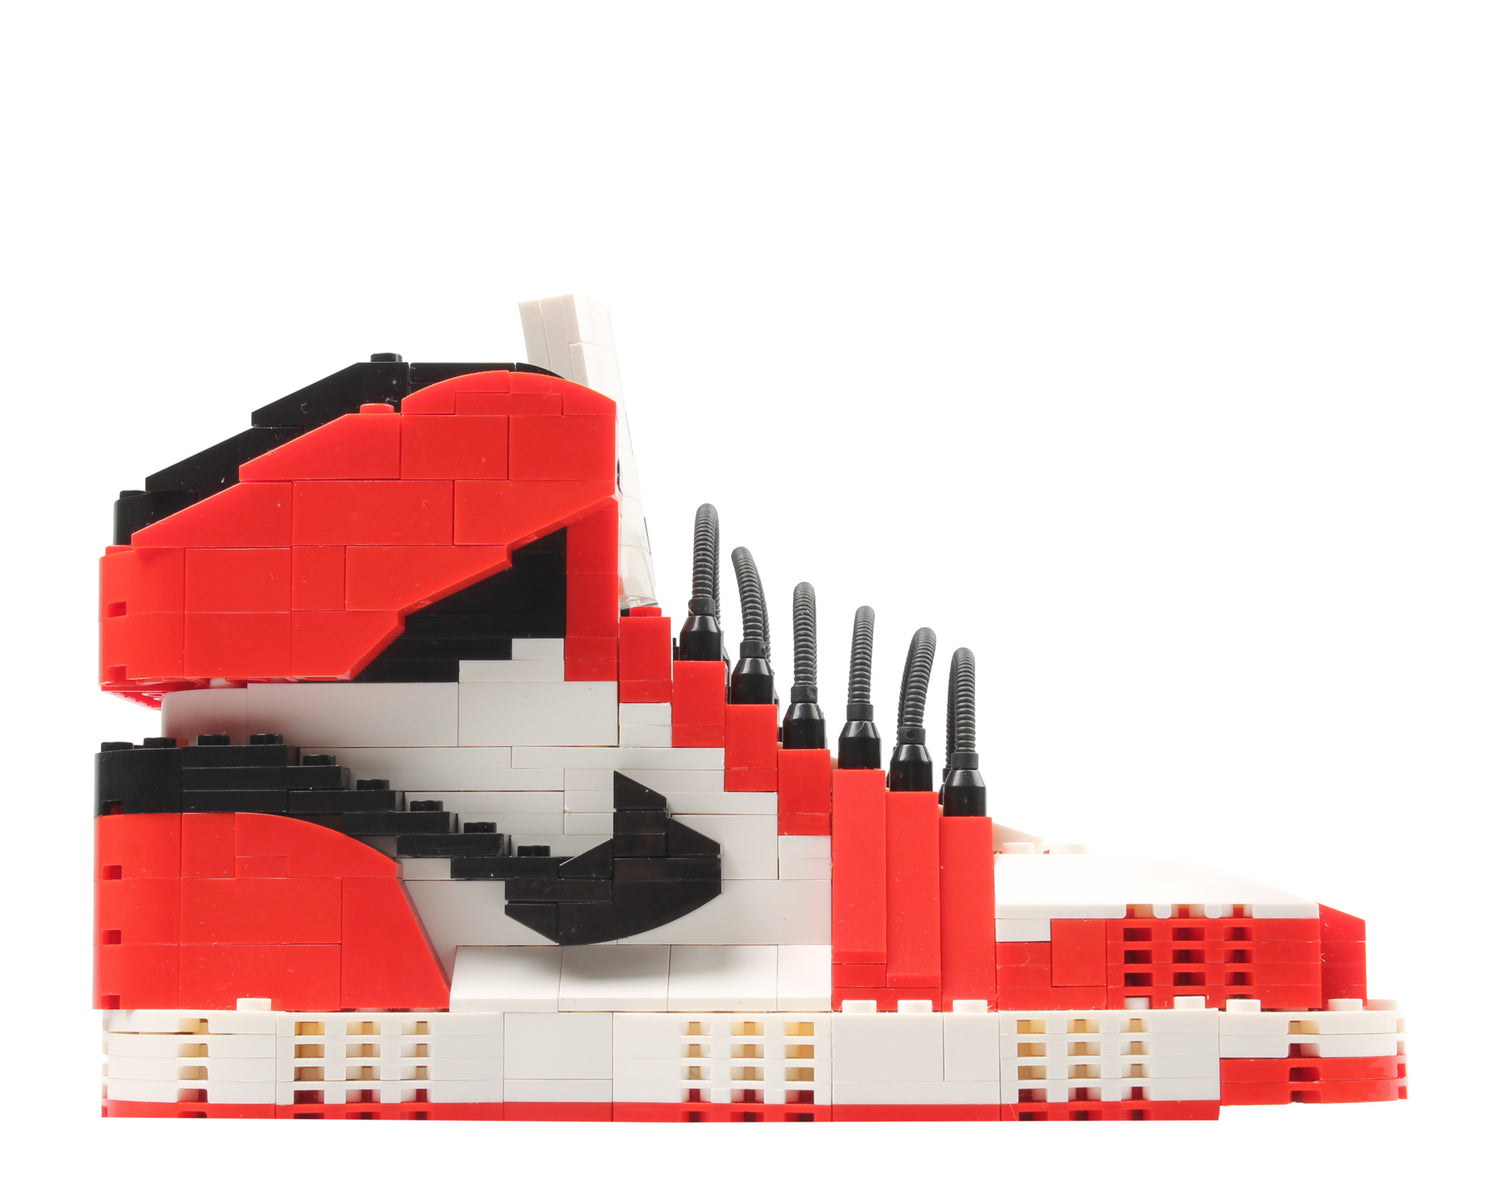 KM 3D AJ1 Homeage To Home SneakerLego Set - Unassembled